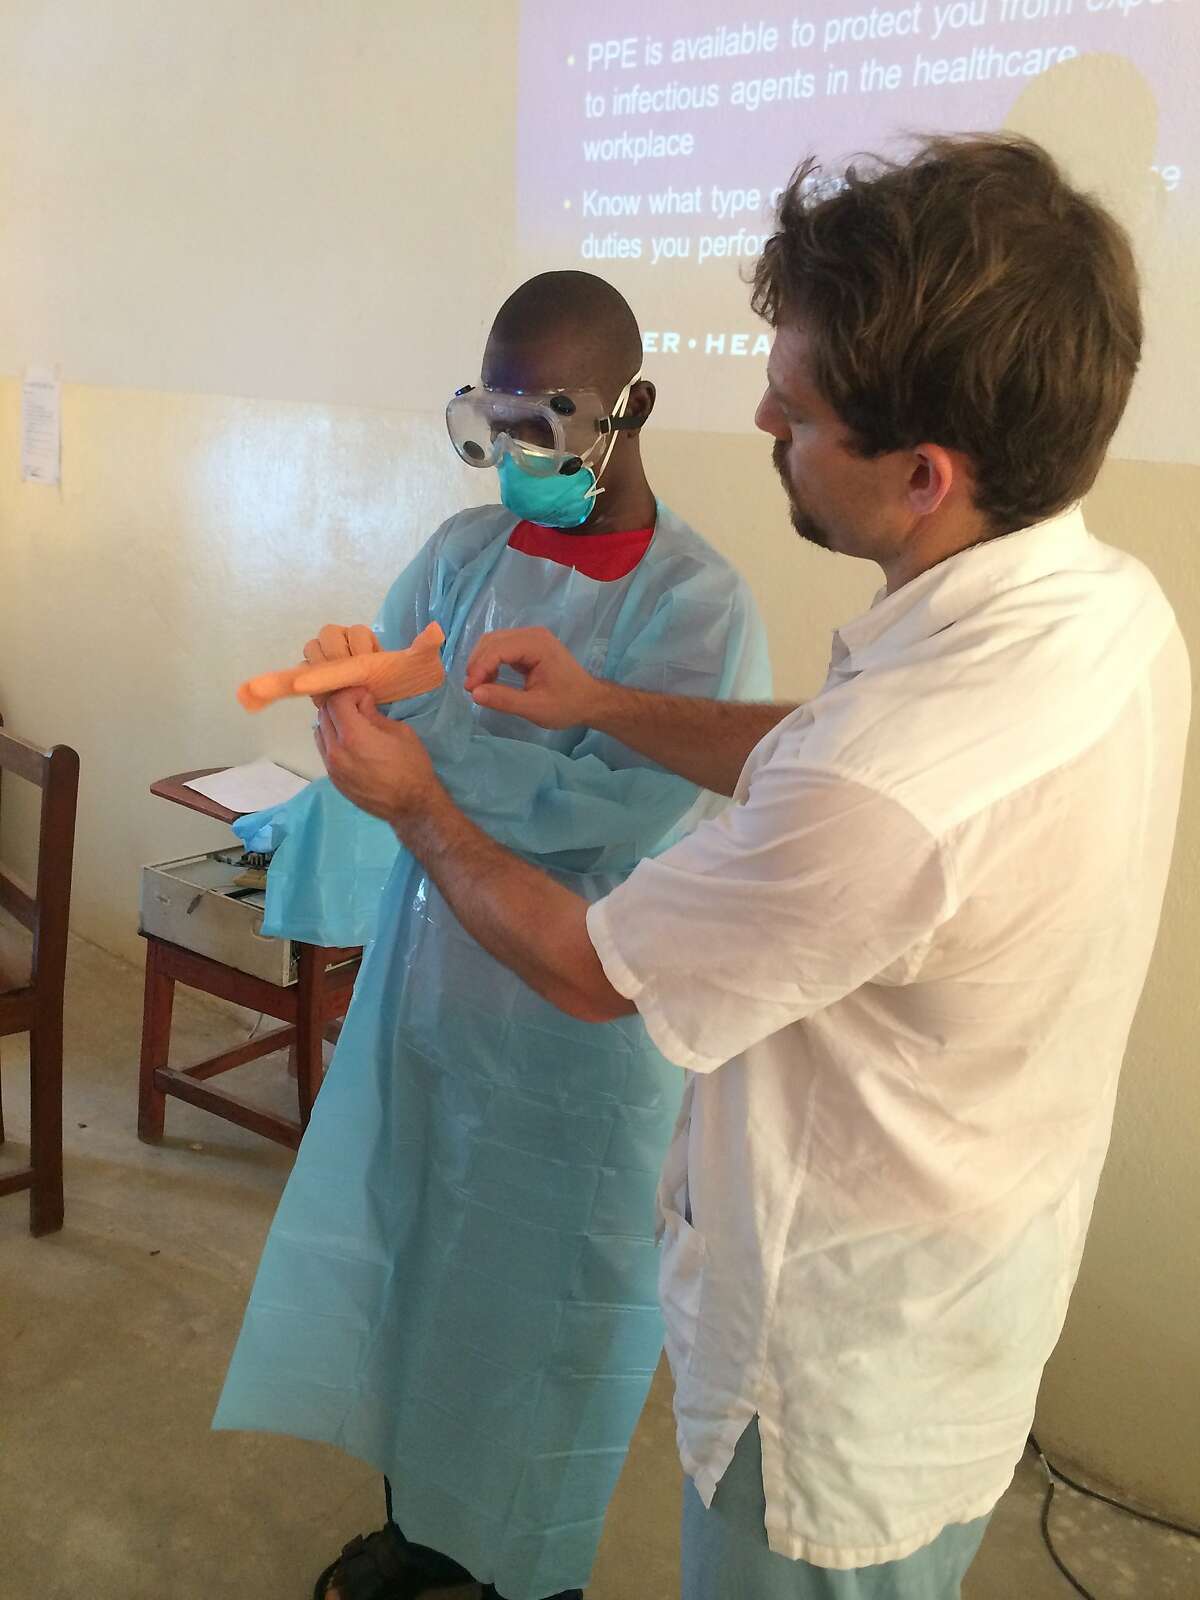 Dr. Dan Kelly of UCSF teaches a health care worker how to protect himself while treating Ebola patients in Sierra Leone.